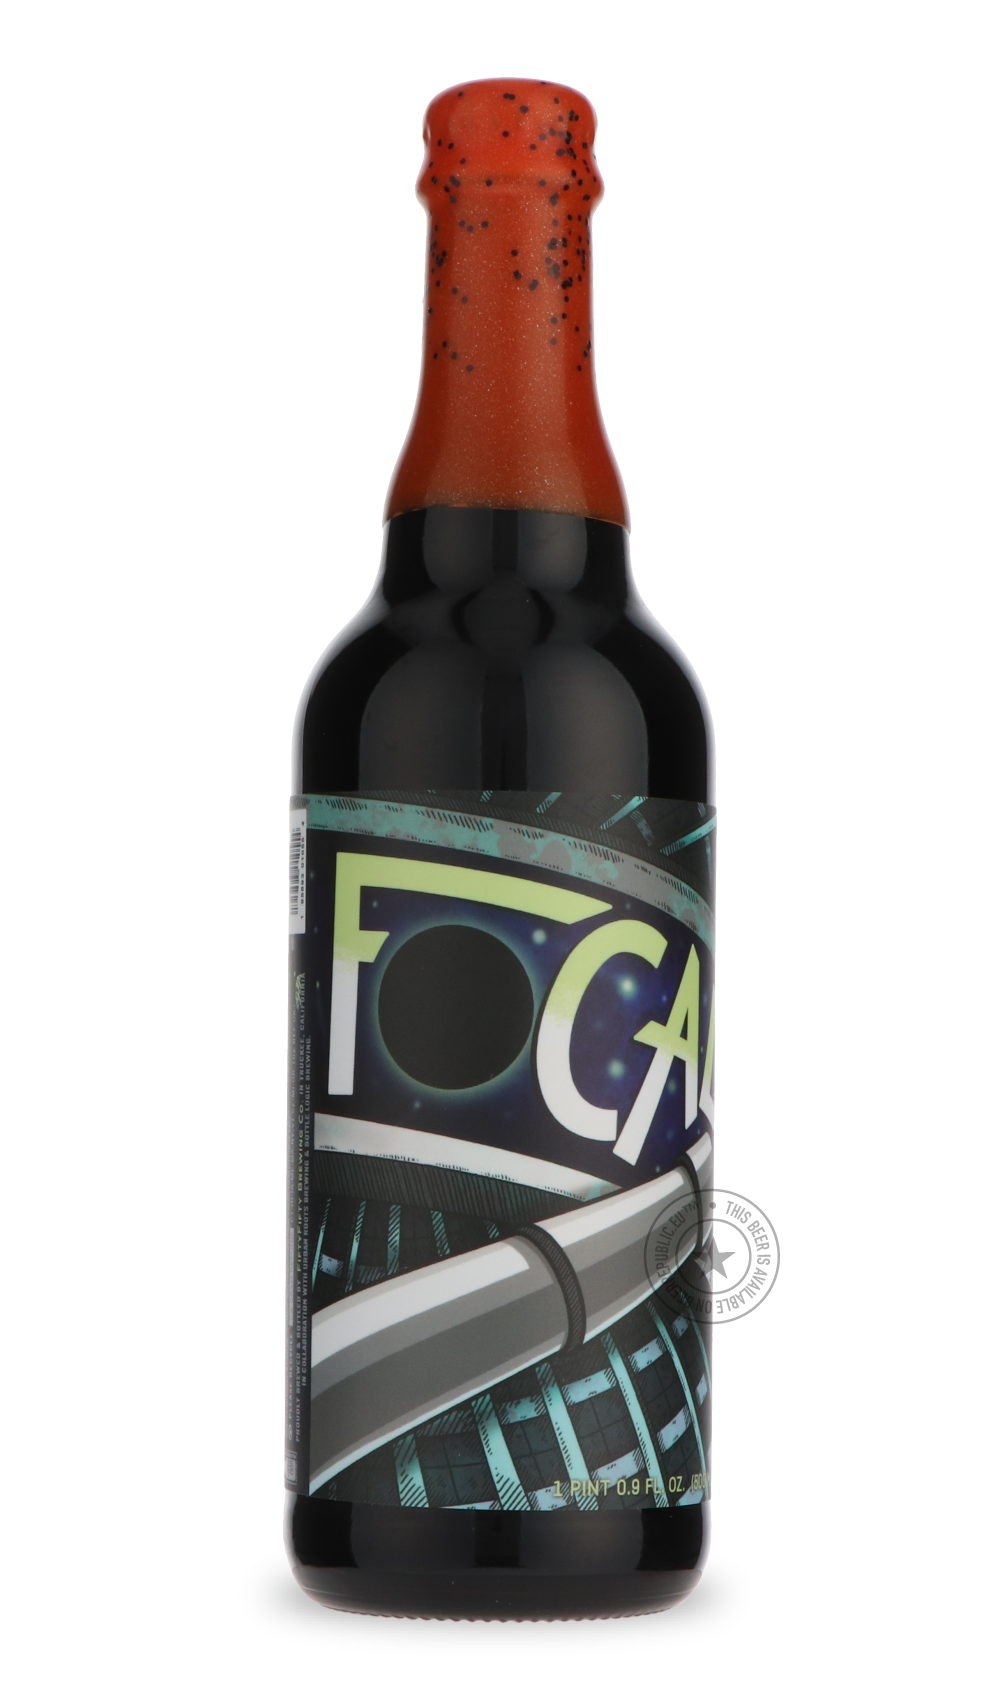 -FiftyFifty- Focal Ratio / Bottle Logic & Urban Roots-Stout & Porter- Only @ Beer Republic - The best online beer store for American & Canadian craft beer - Buy beer online from the USA and Canada - Bier online kopen - Amerikaans bier kopen - Craft beer store - Craft beer kopen - Amerikanisch bier kaufen - Bier online kaufen - Acheter biere online - IPA - Stout - Porter - New England IPA - Hazy IPA - Imperial Stout - Barrel Aged - Barrel Aged Imperial Stout - Brown - Dark beer - Blond - Blonde - Pilsner - L